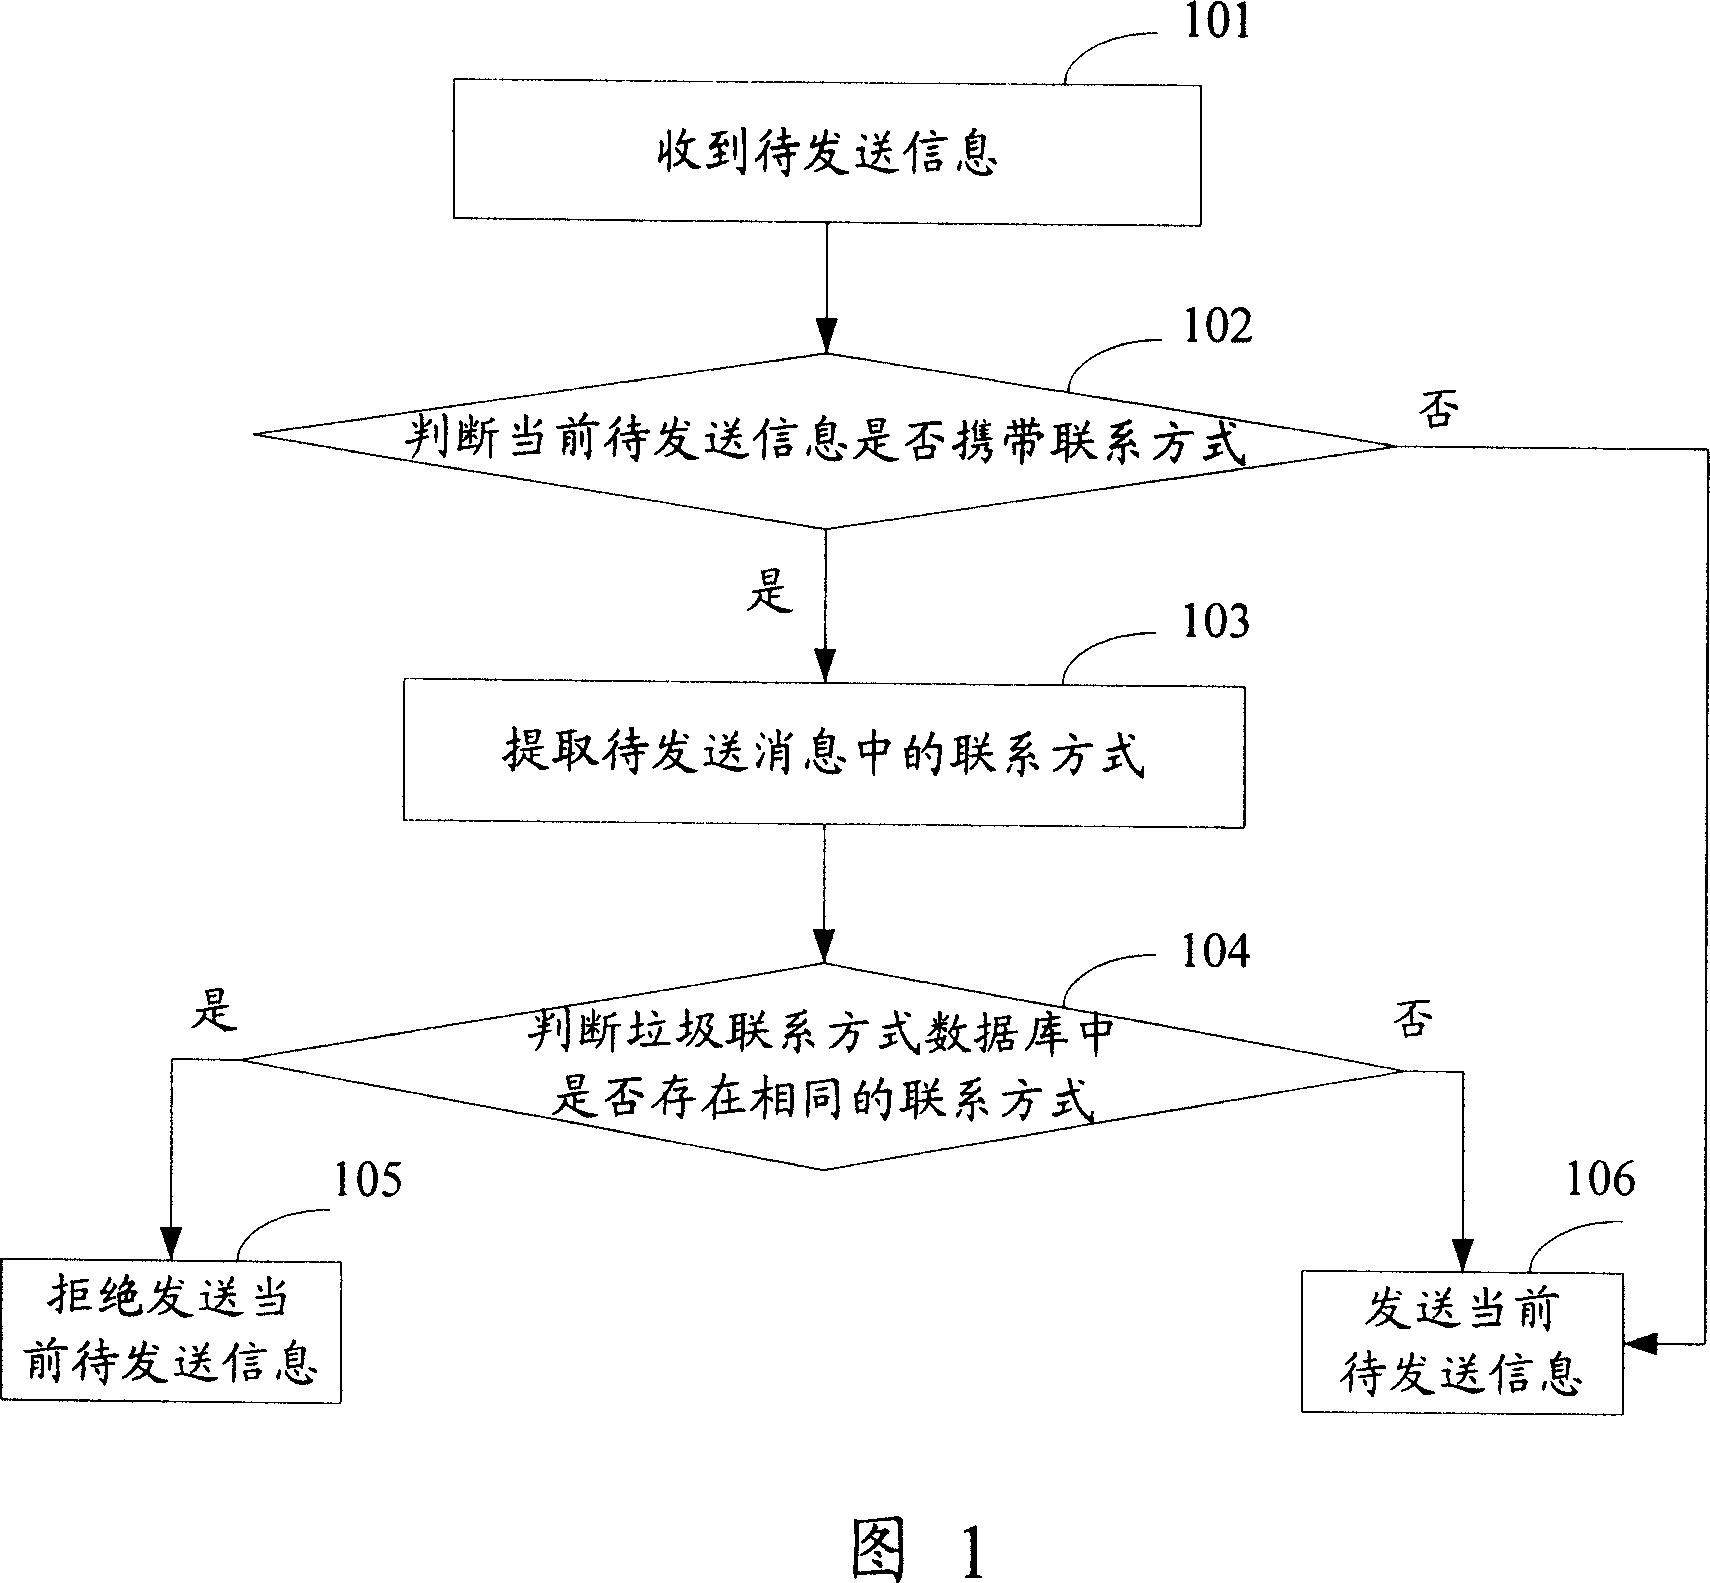 Method and apparatus for filteirng information